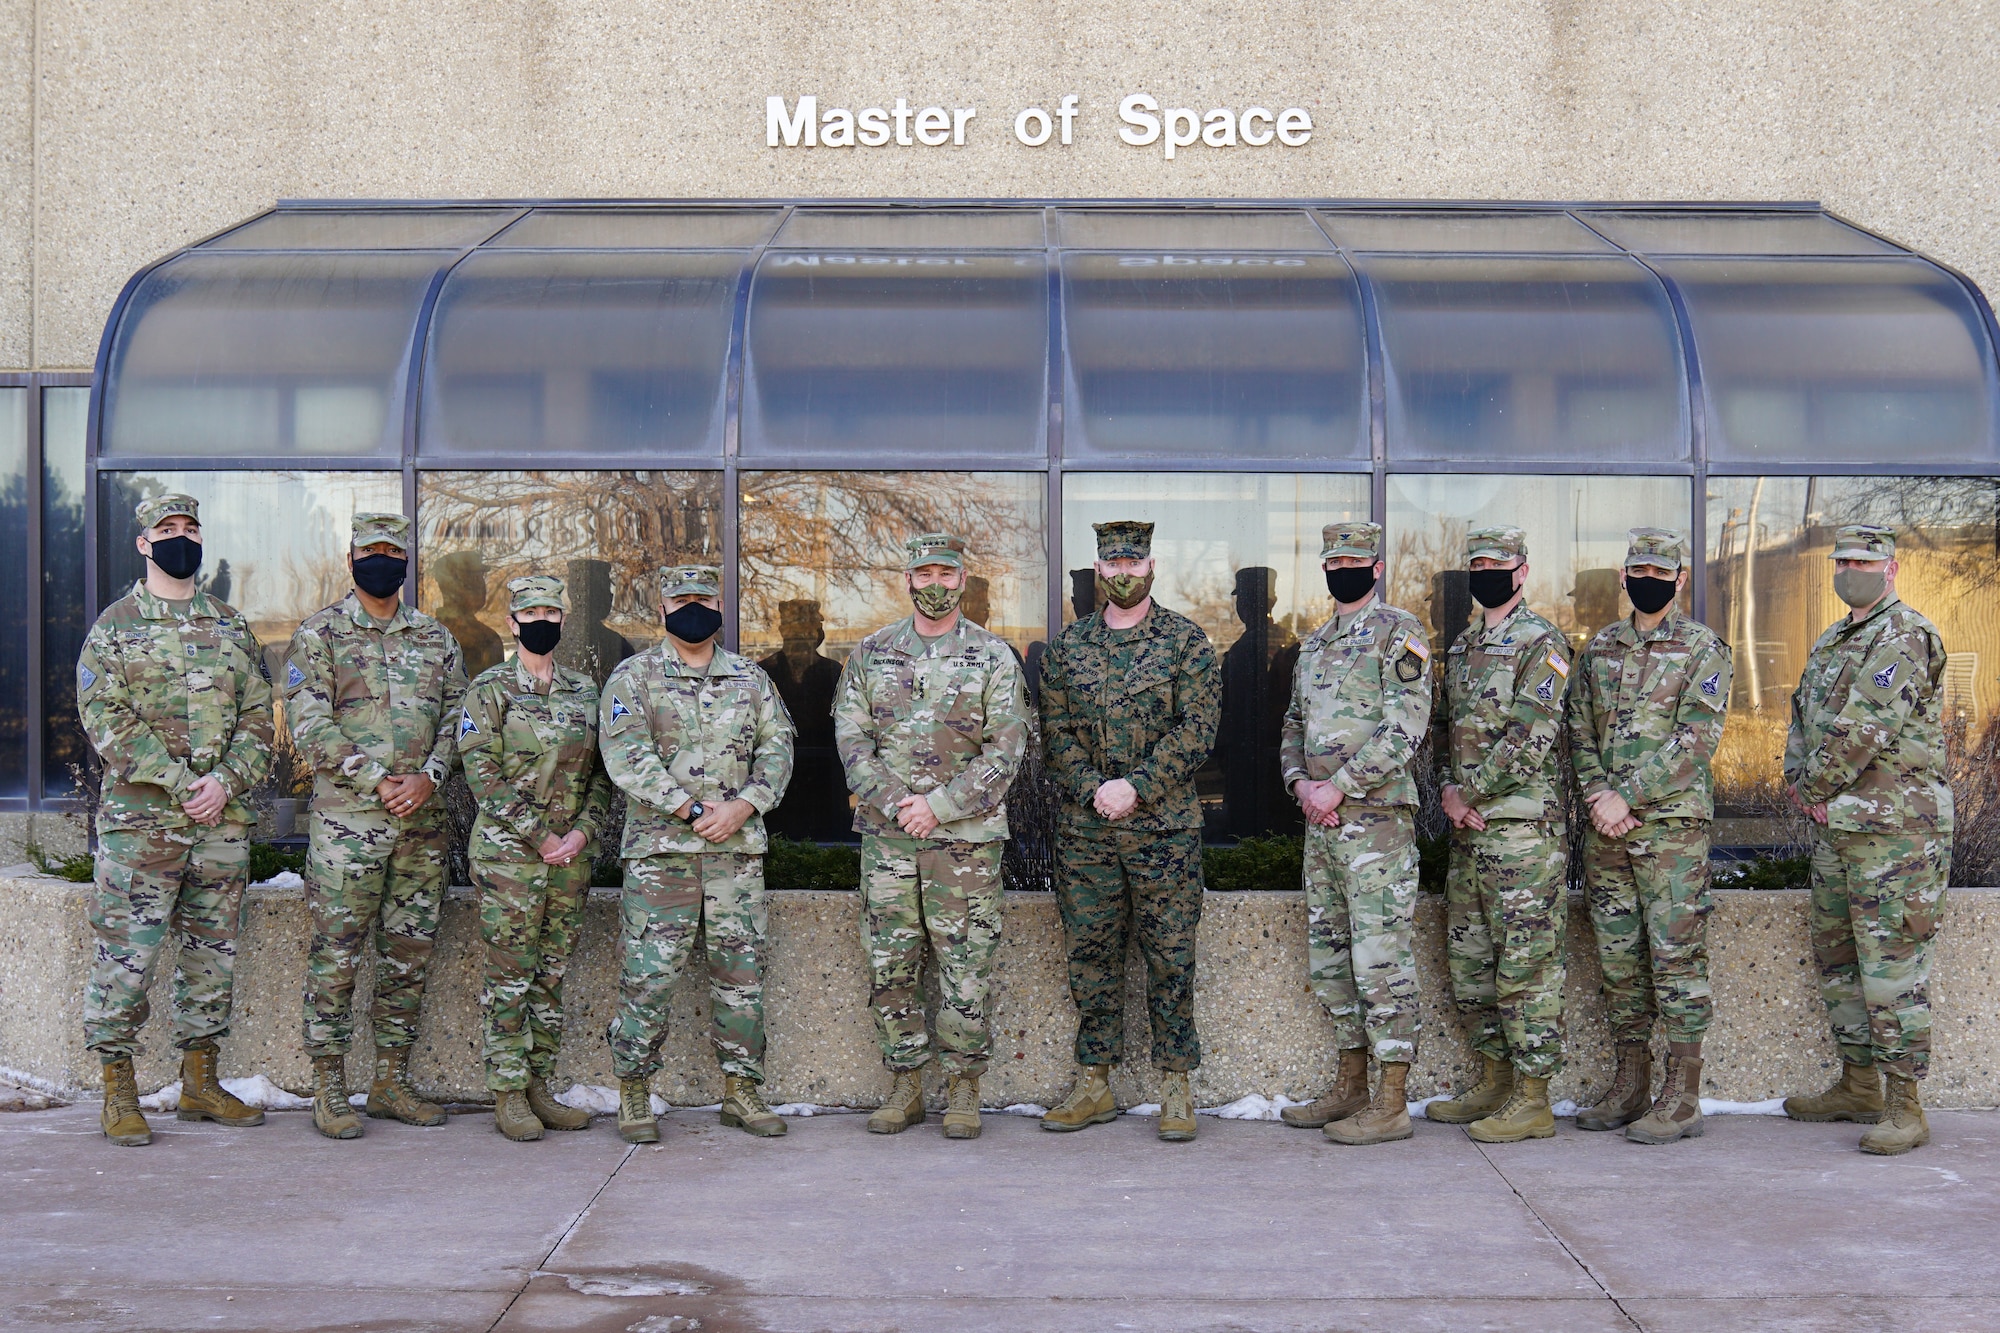 SCHRIEVER AIR FORCE BASE, Colo. – Leadership from Space Deltas 6, 8, 9, and STAR Delta Provisional, pose for a photo with U.S. Army Gen. James H. Dickinson, United States Space Command commander, during a visit to Schriever AFB, Jan. 7, 2021. Gen. Dickinson and the Delta leadership teams discussed how their missions will support and augment the combatant command now and in the future. (U.S. Space Force Photo by Dennis Rogers)